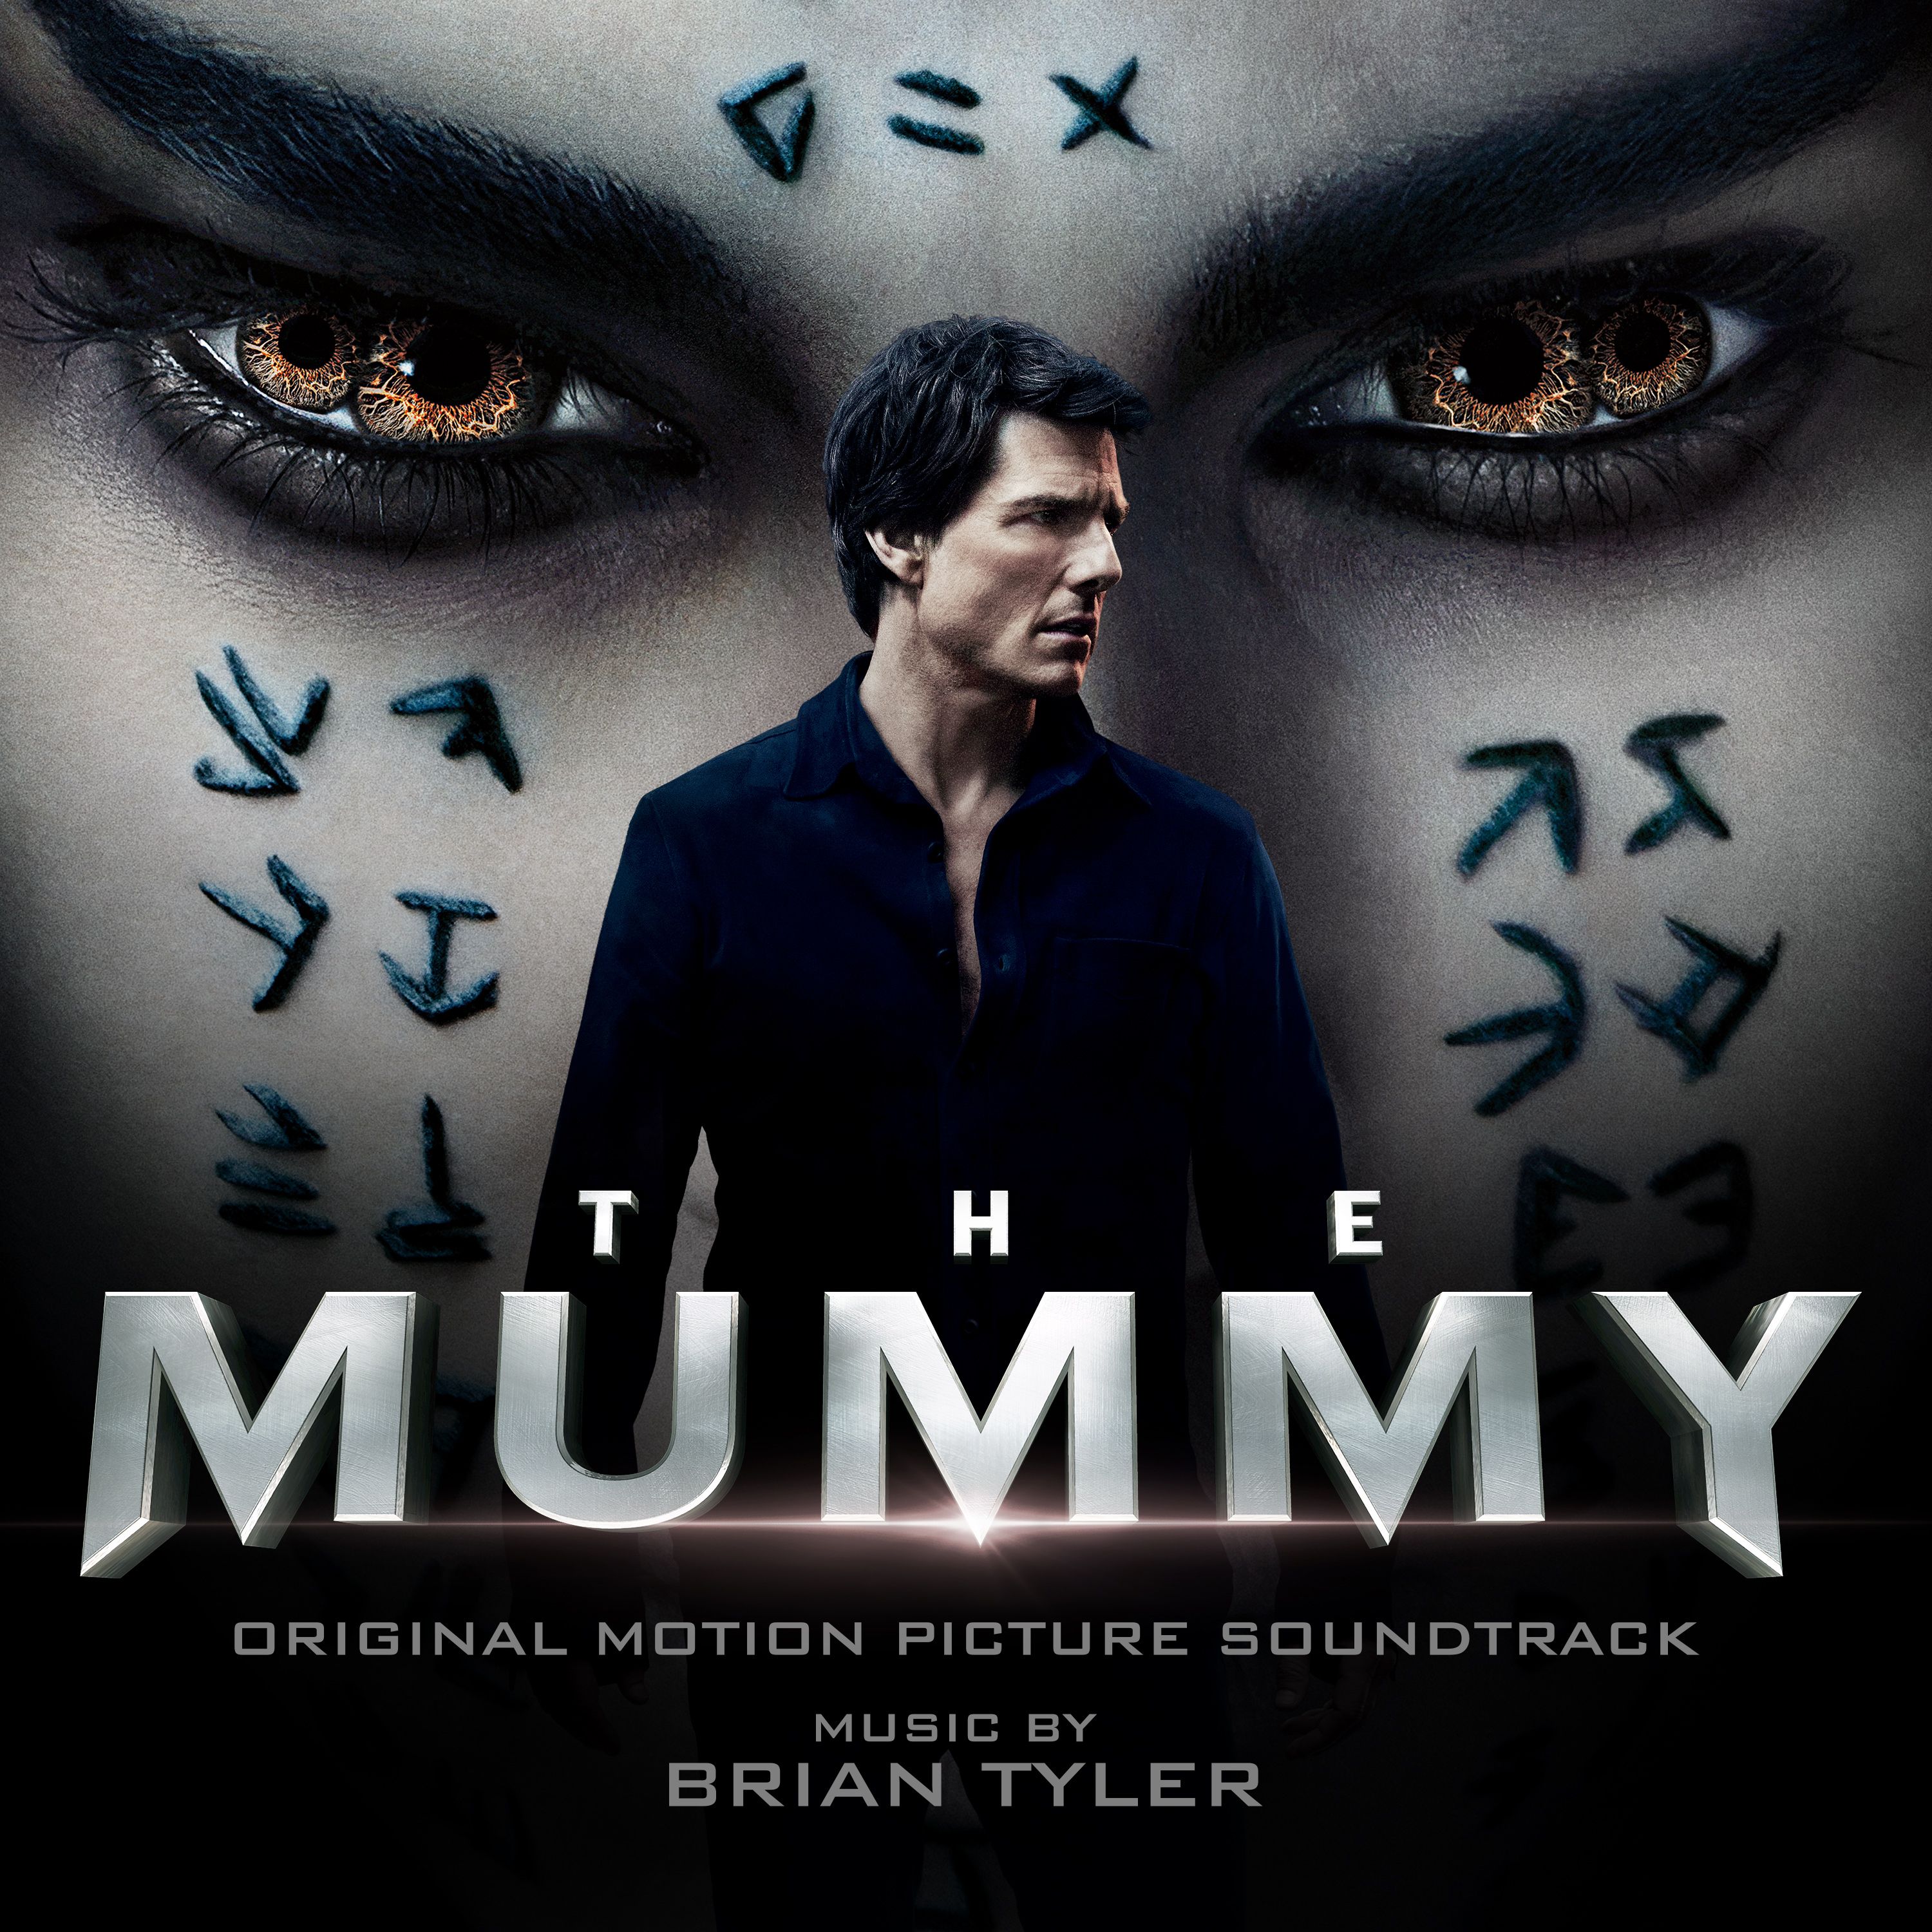 The Mummy (Original Motion Picture Soundtrack) (OST) - Brian Tyler